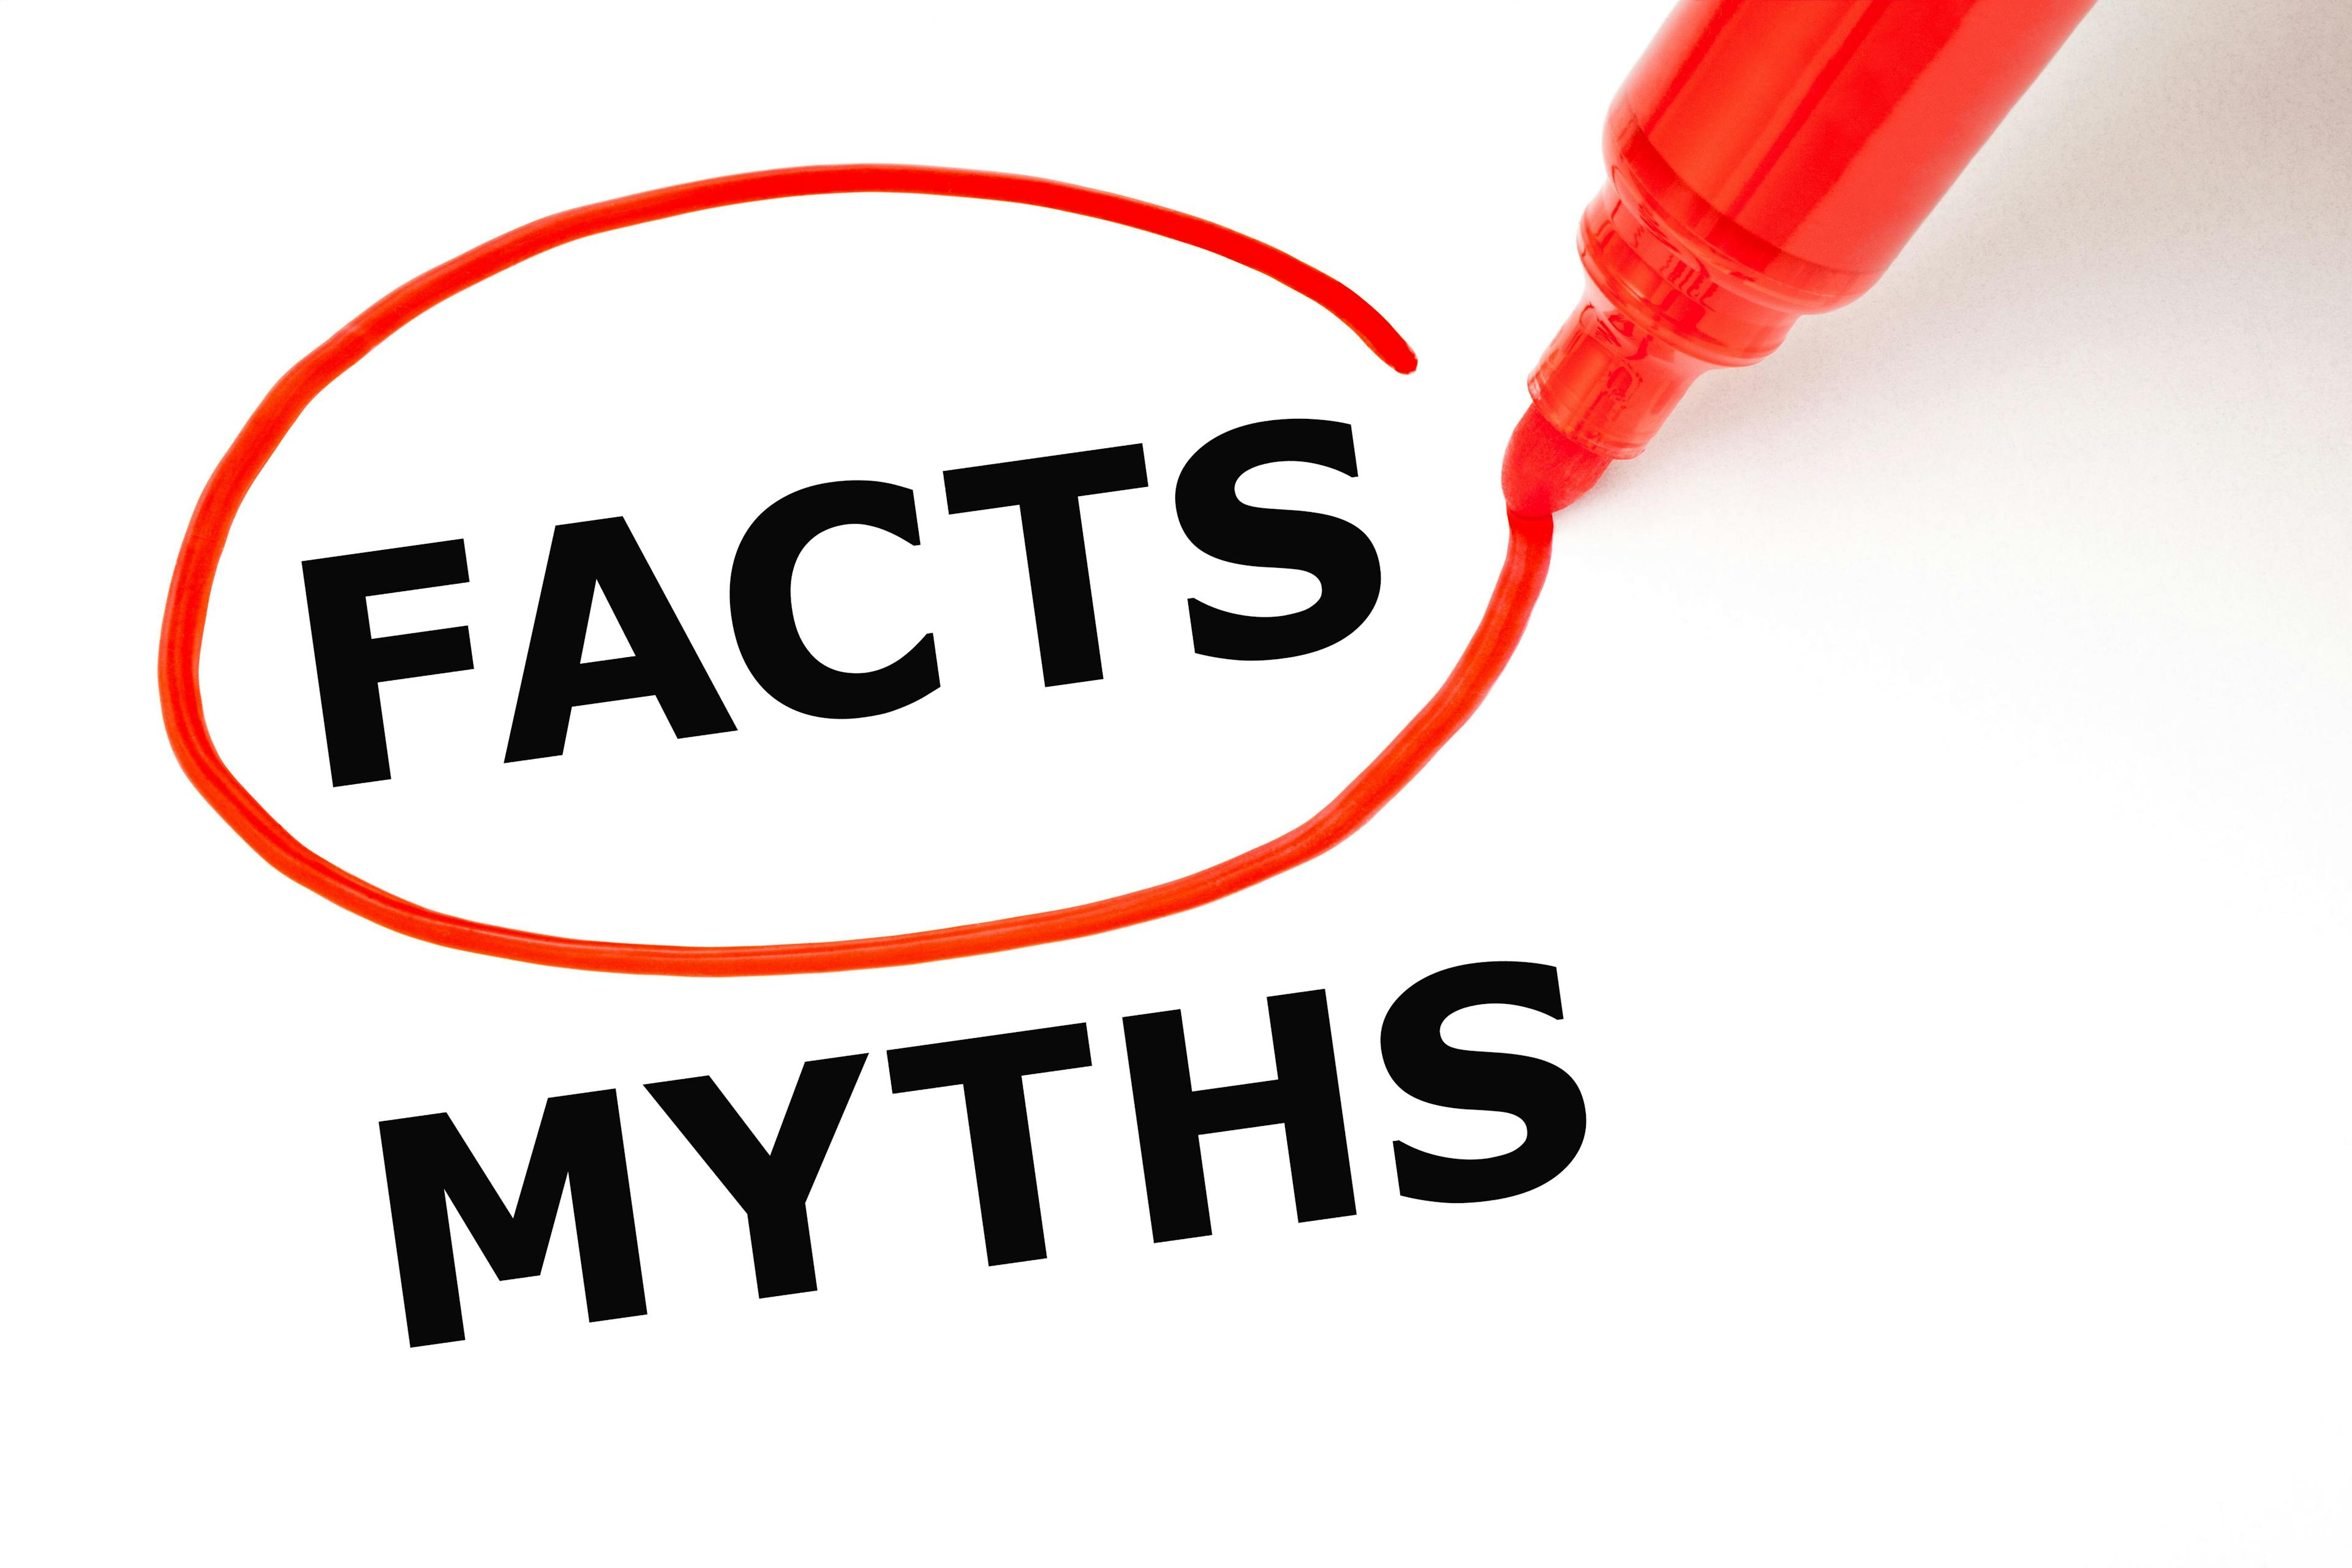 Medicare Myths Debunked: Common Misconceptions About Coverage